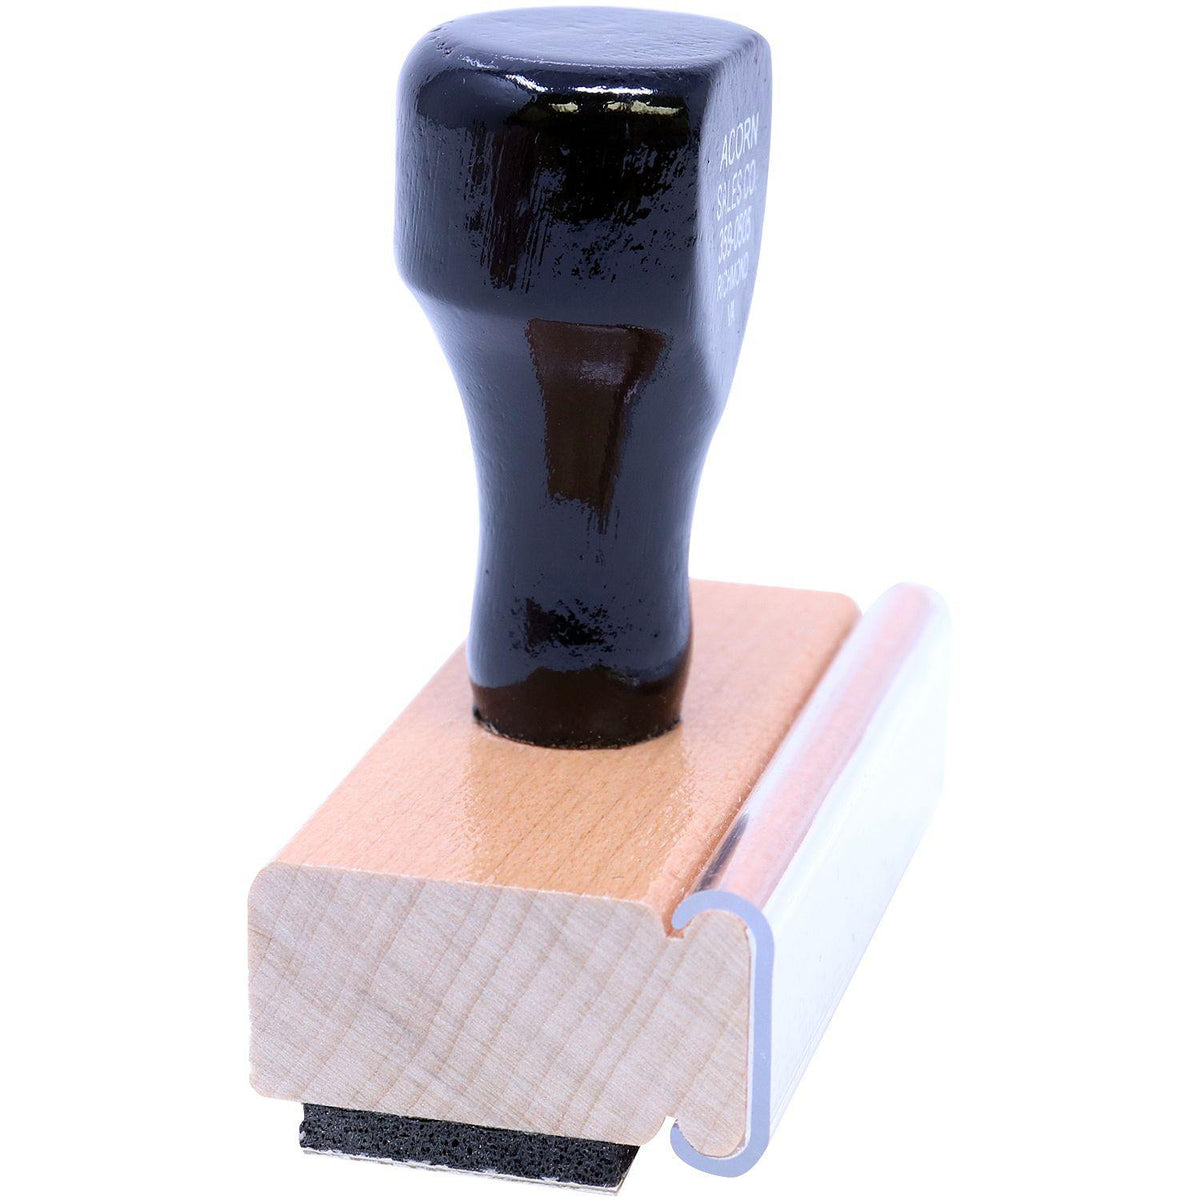 Side View of Large Outline Personal Rubber Stamp at an Angle